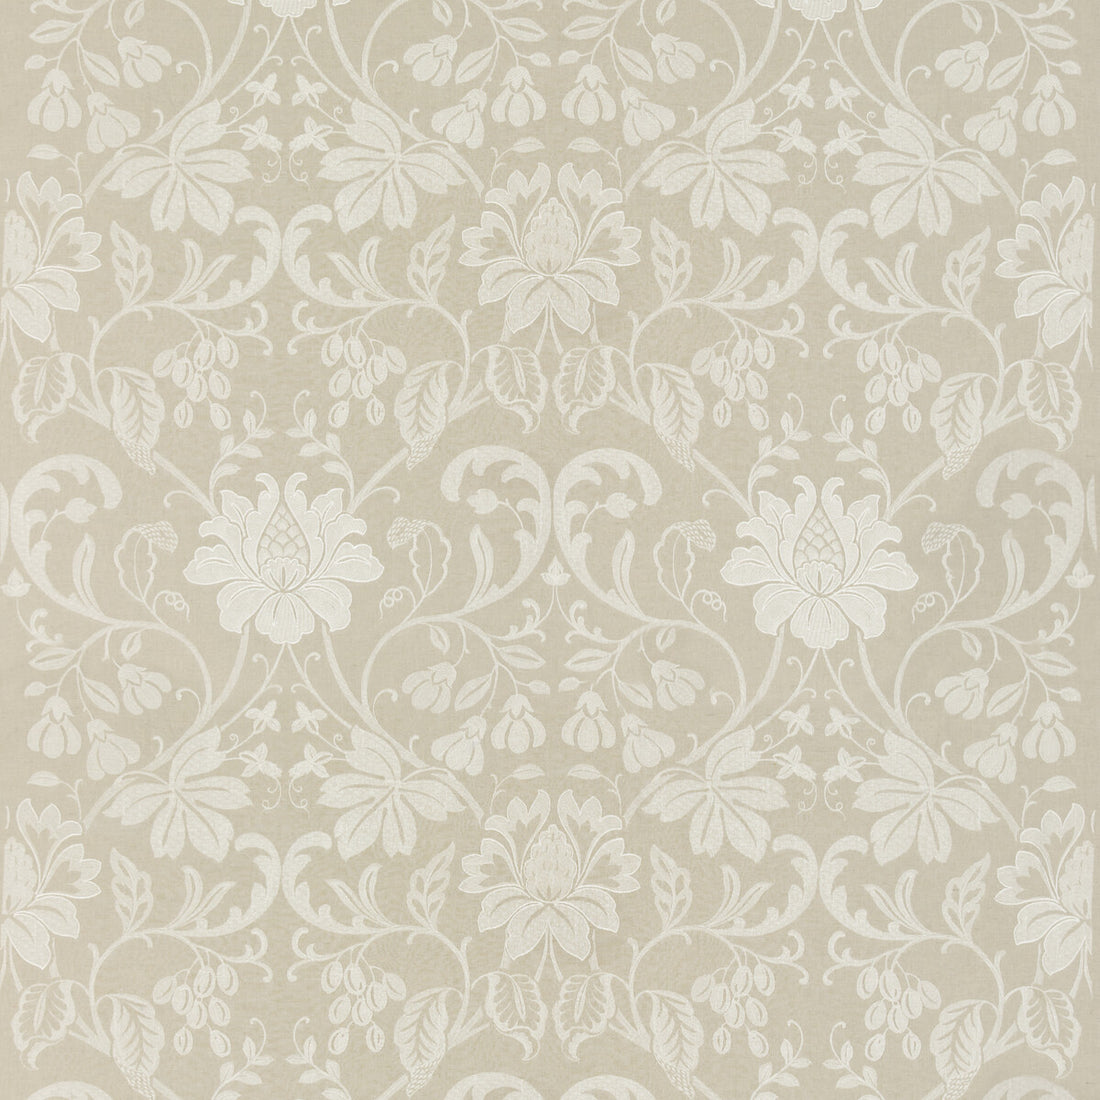 Samara fabric in linen color - pattern BF10721.1.0 - by G P &amp; J Baker in the East To West collection